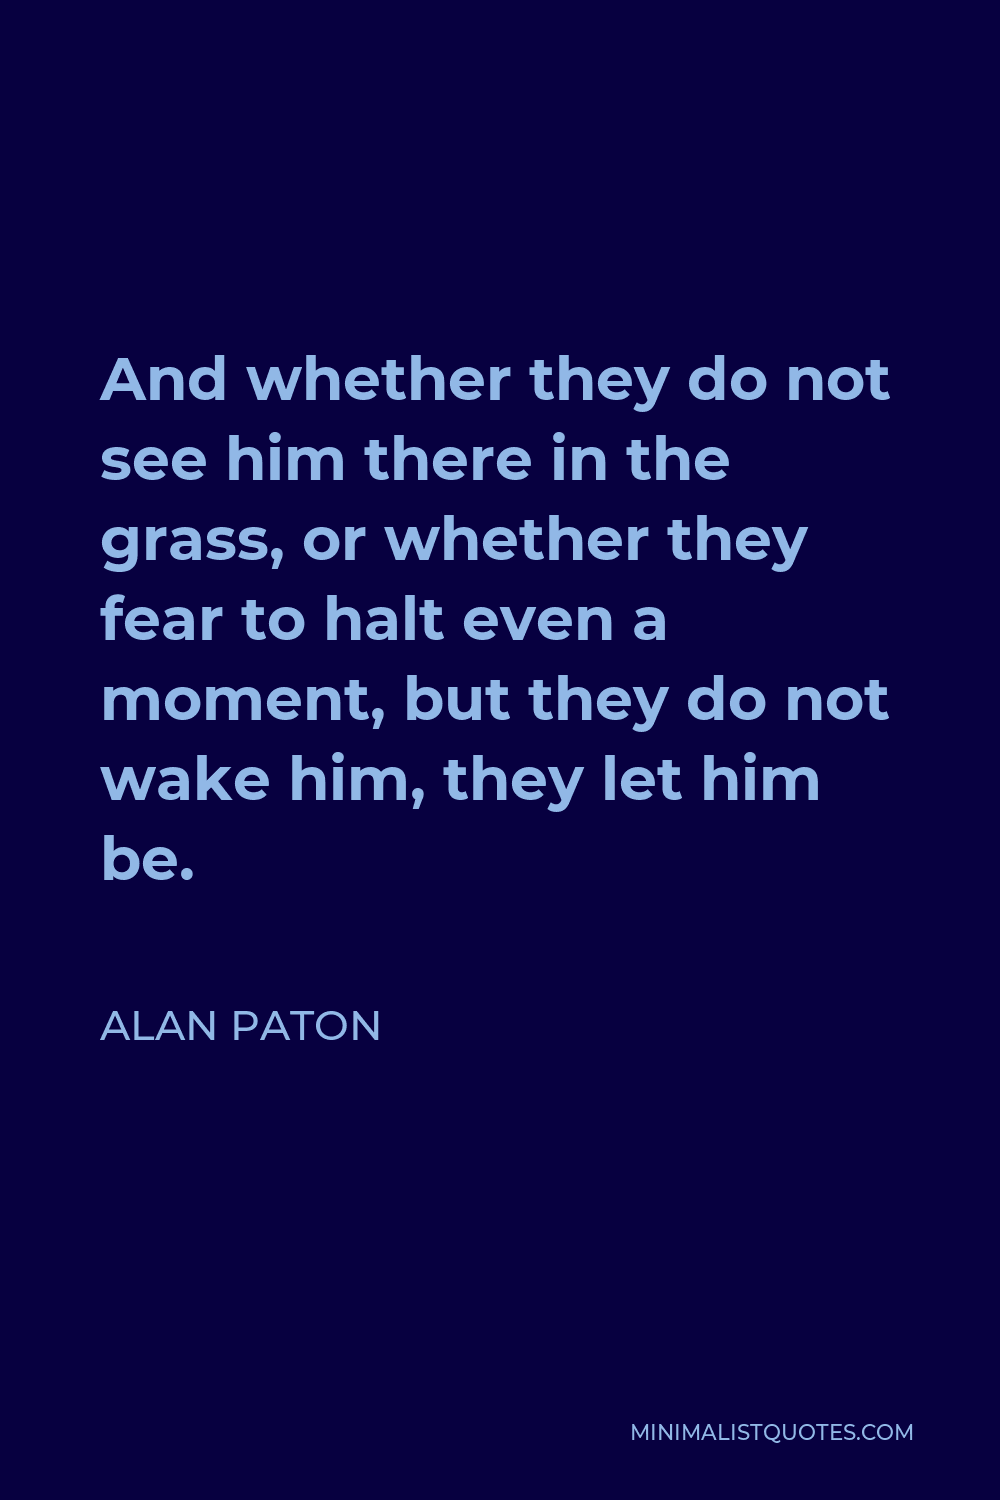 Alan Paton Quote - And whether they do not see him there in the grass, or whether they fear to halt even a moment, but they do not wake him, they let him be.